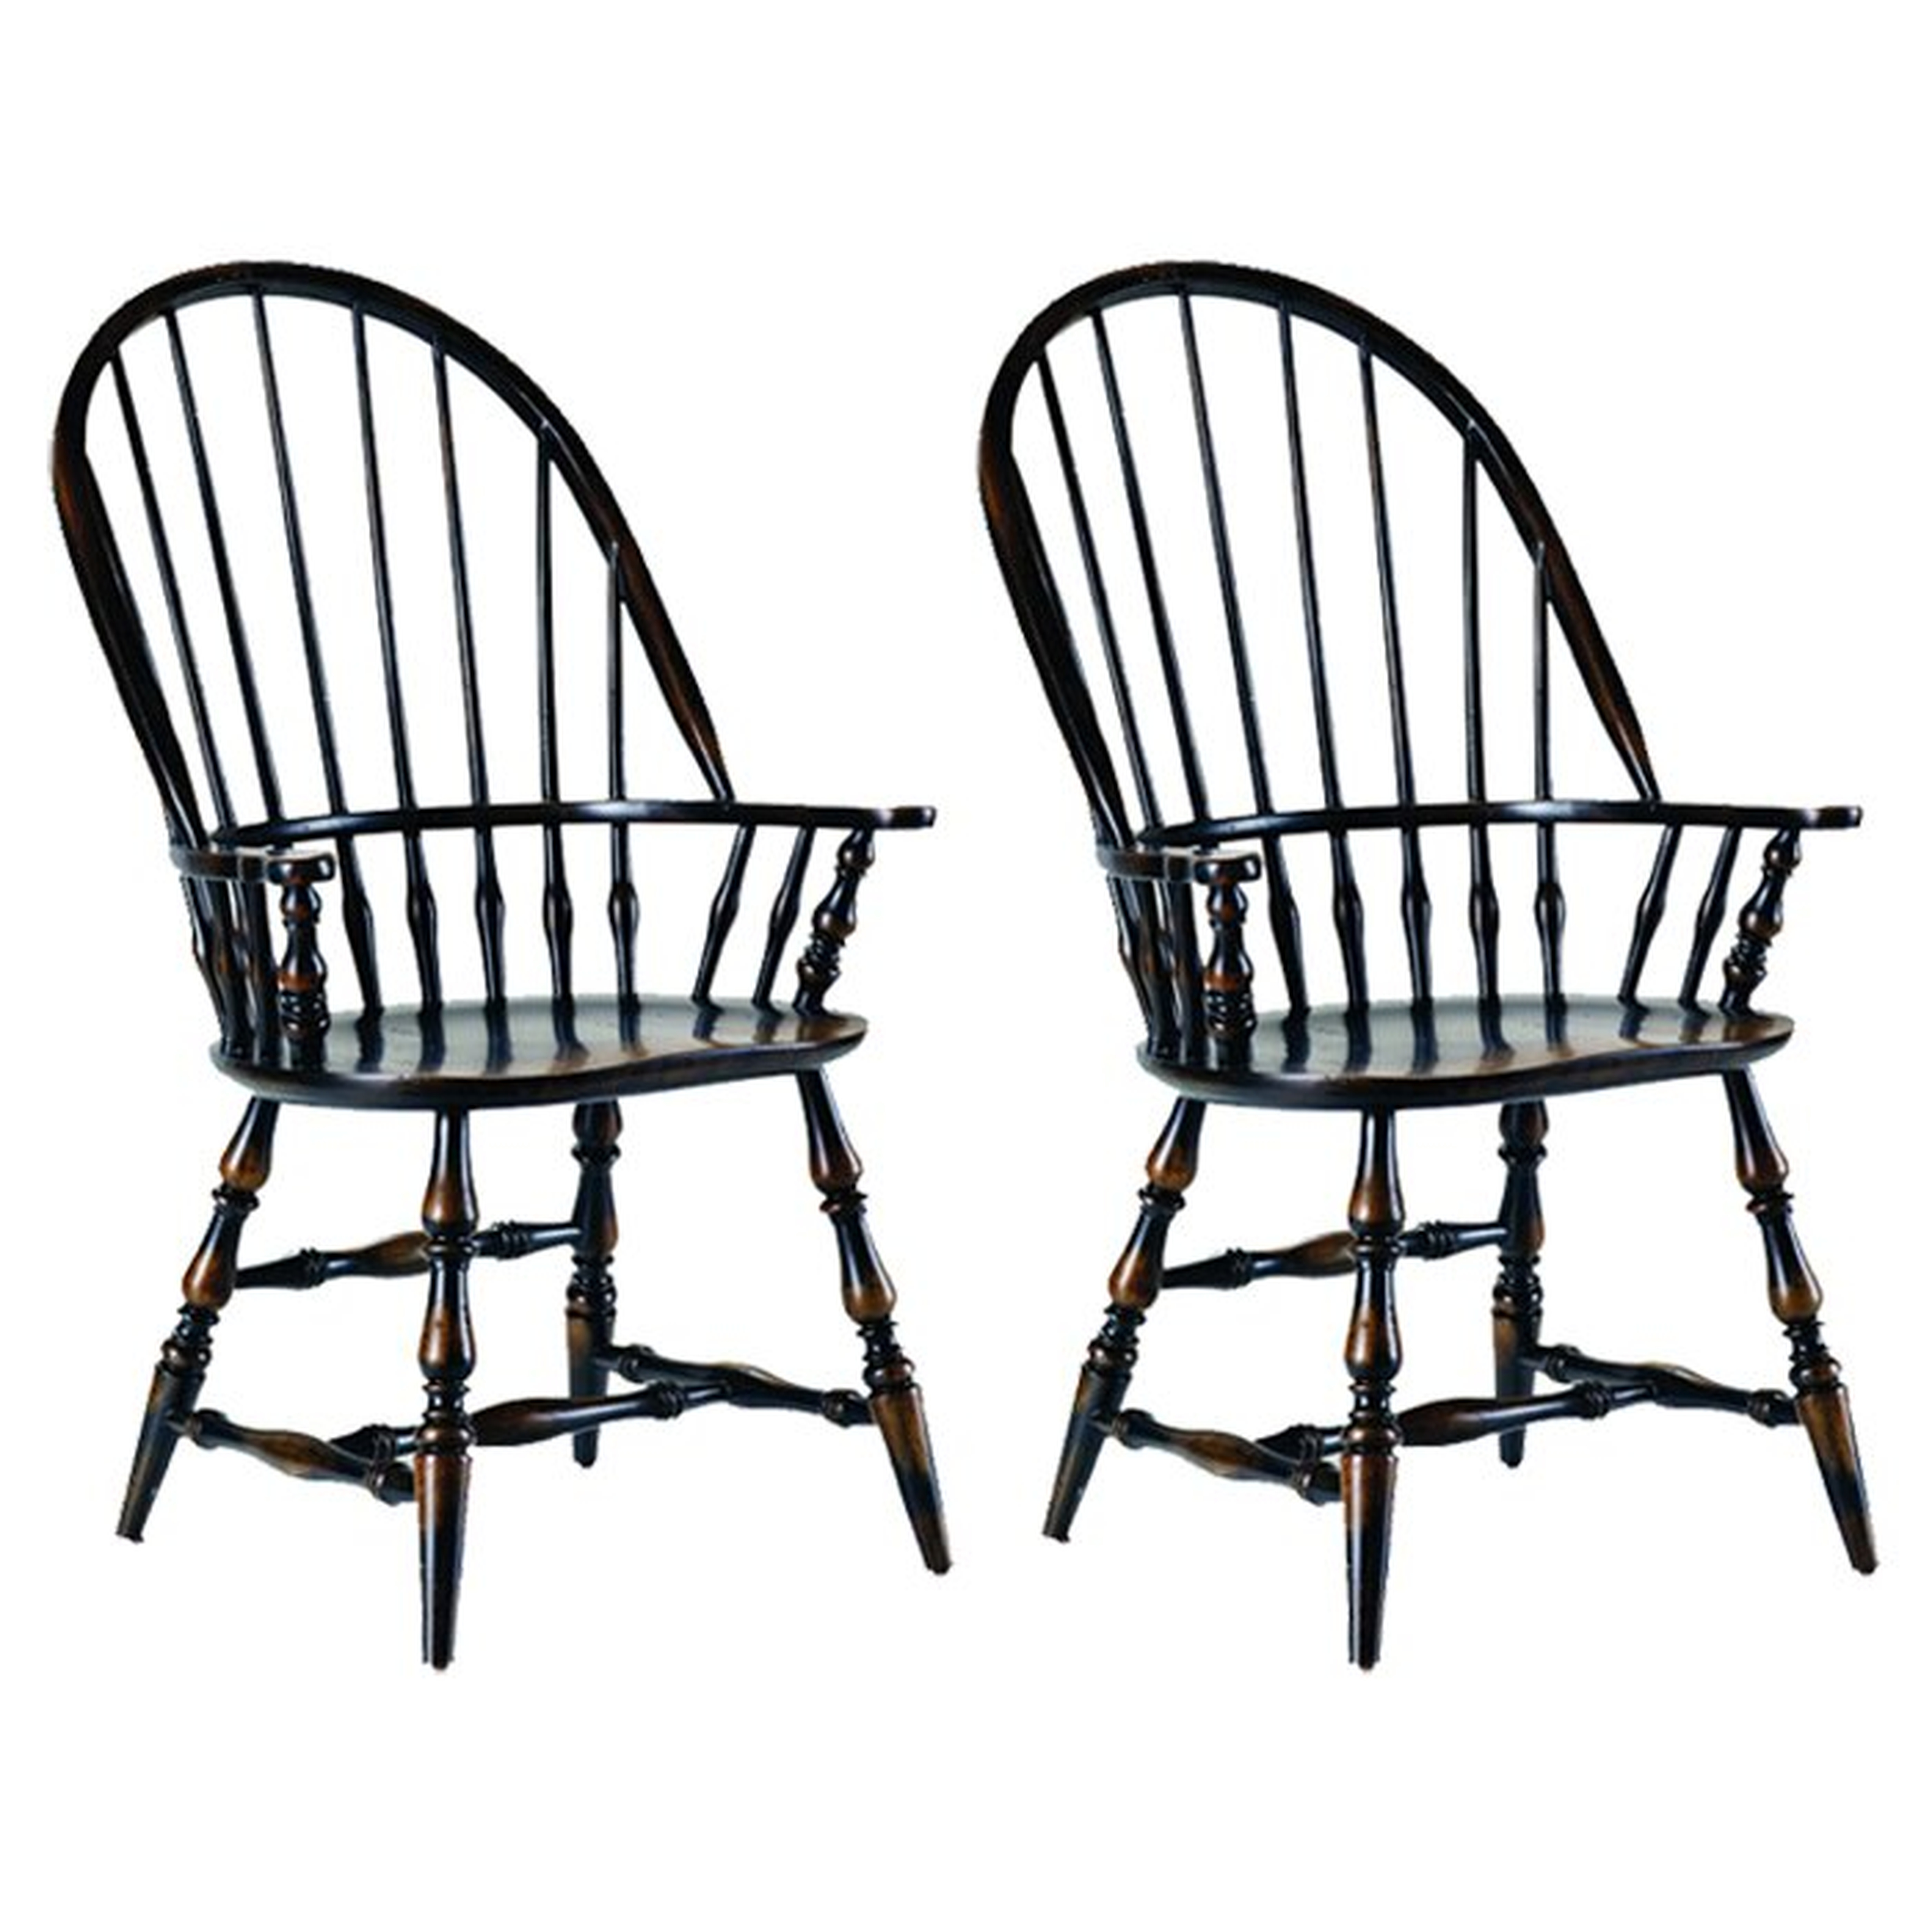 Hooker Furniture Sanctuary Windsor Dining Chair - Perigold